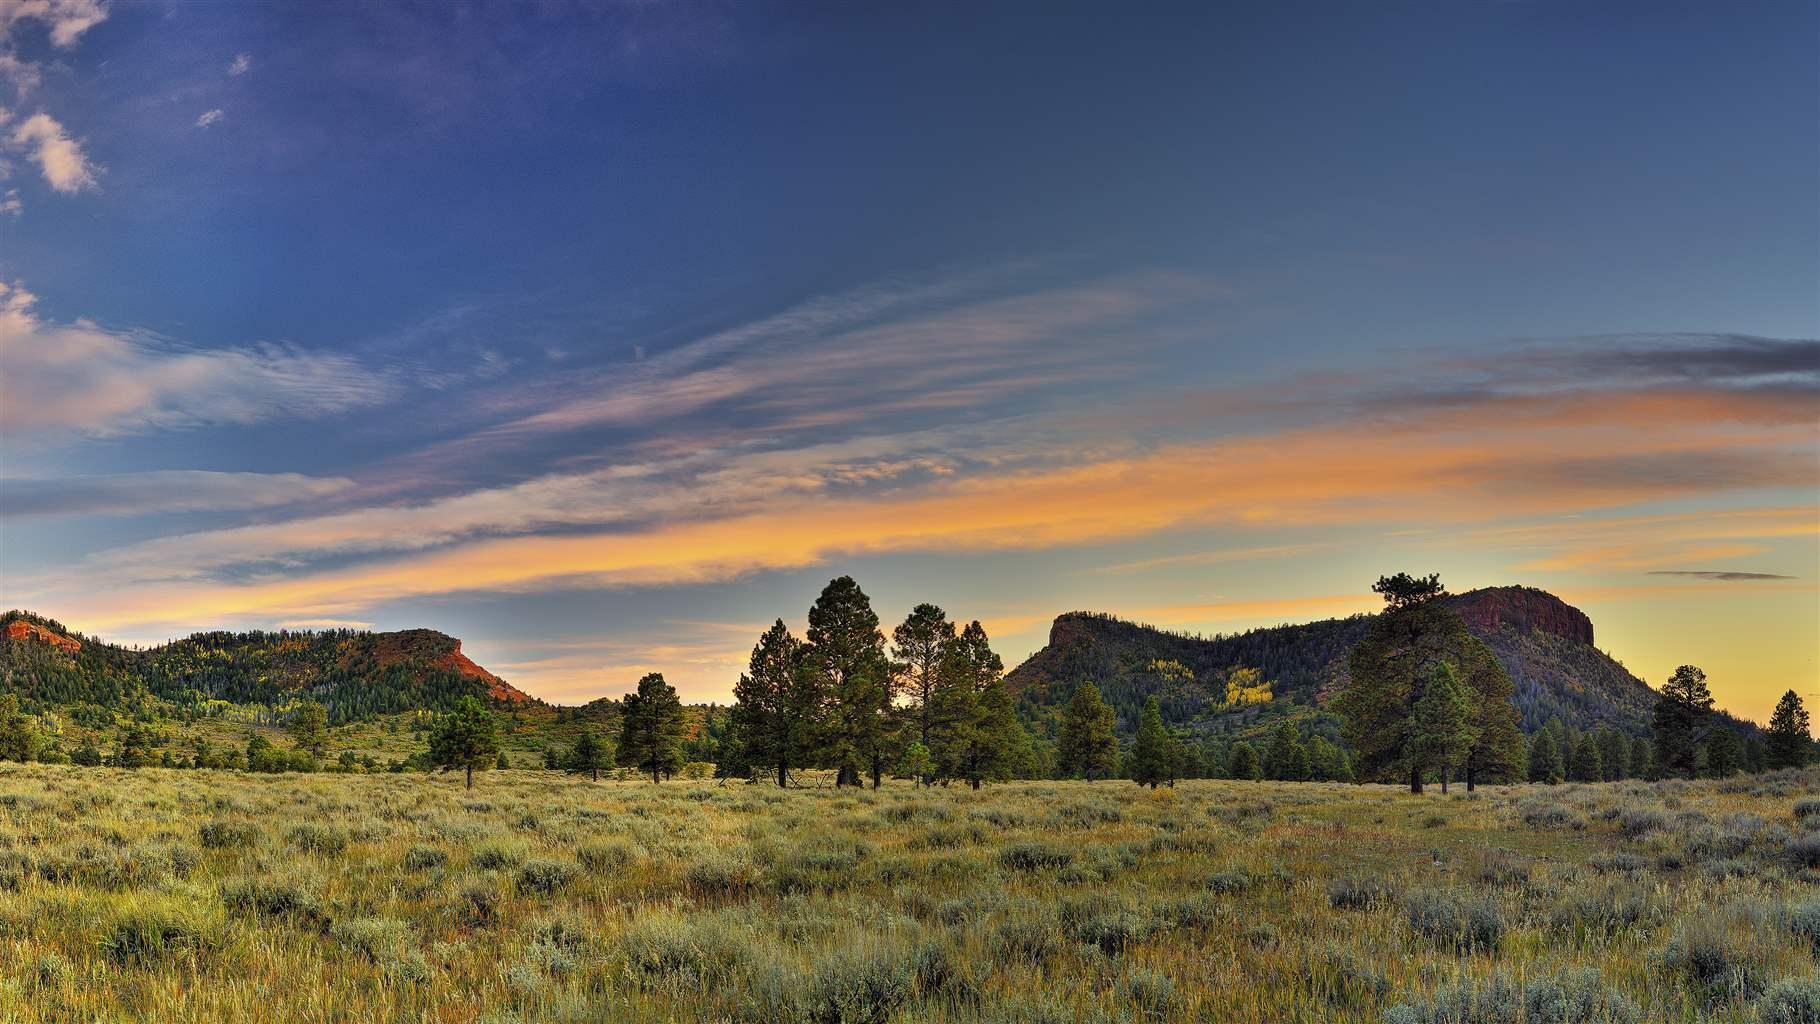 Sunset over Bears Ears Buttes in southern Utah. Protected in 2016 as part of the Bears Ears National Monument, the buttes are included in the redrawn Shash Jaa National Monument.